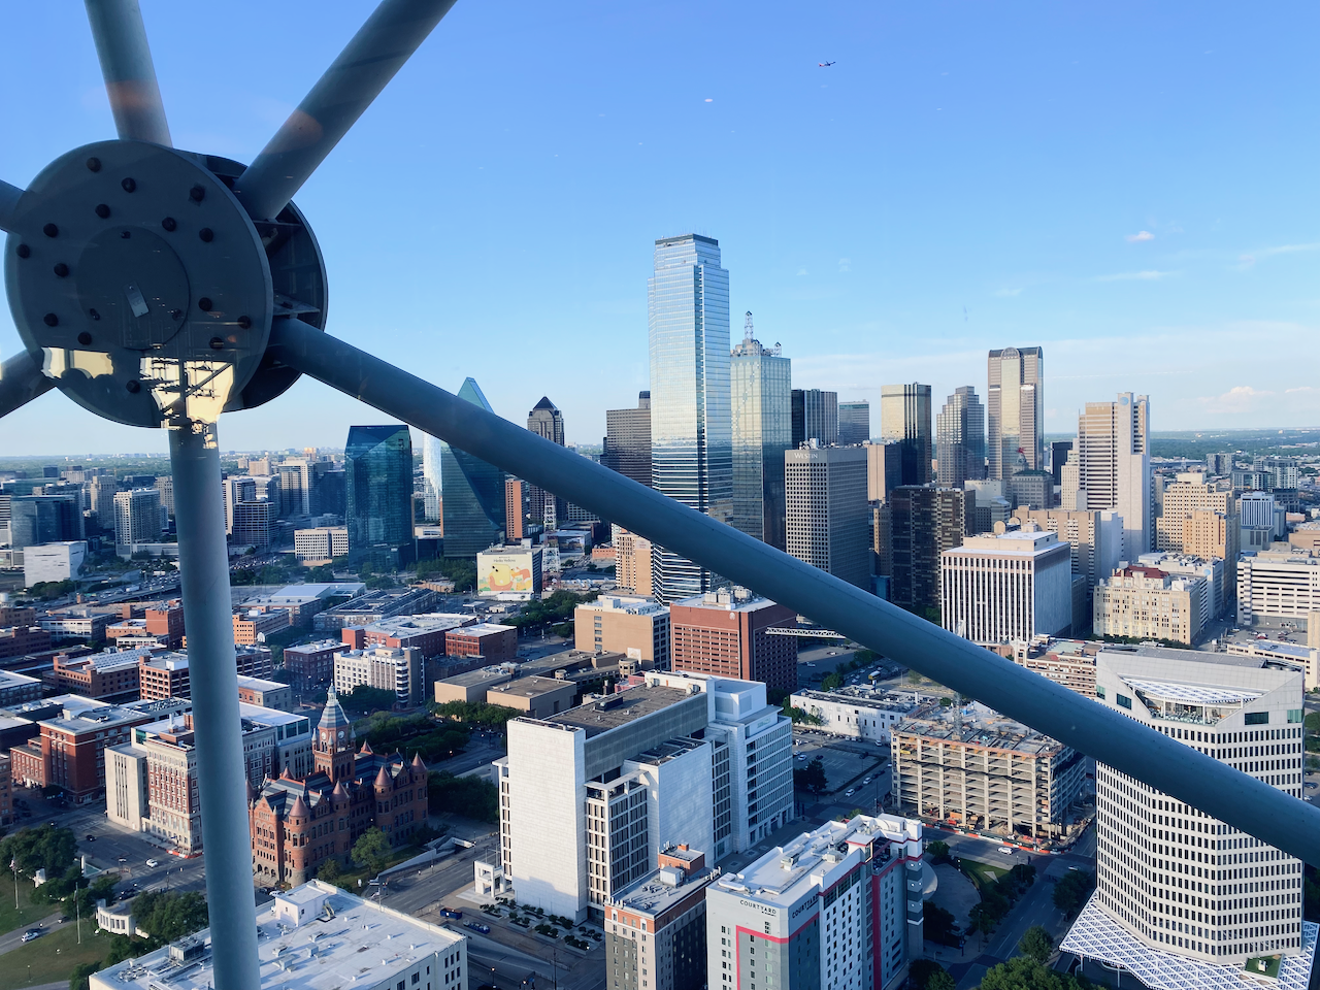 The view from Reunion Tower is beautiful to some, terrifying to others.